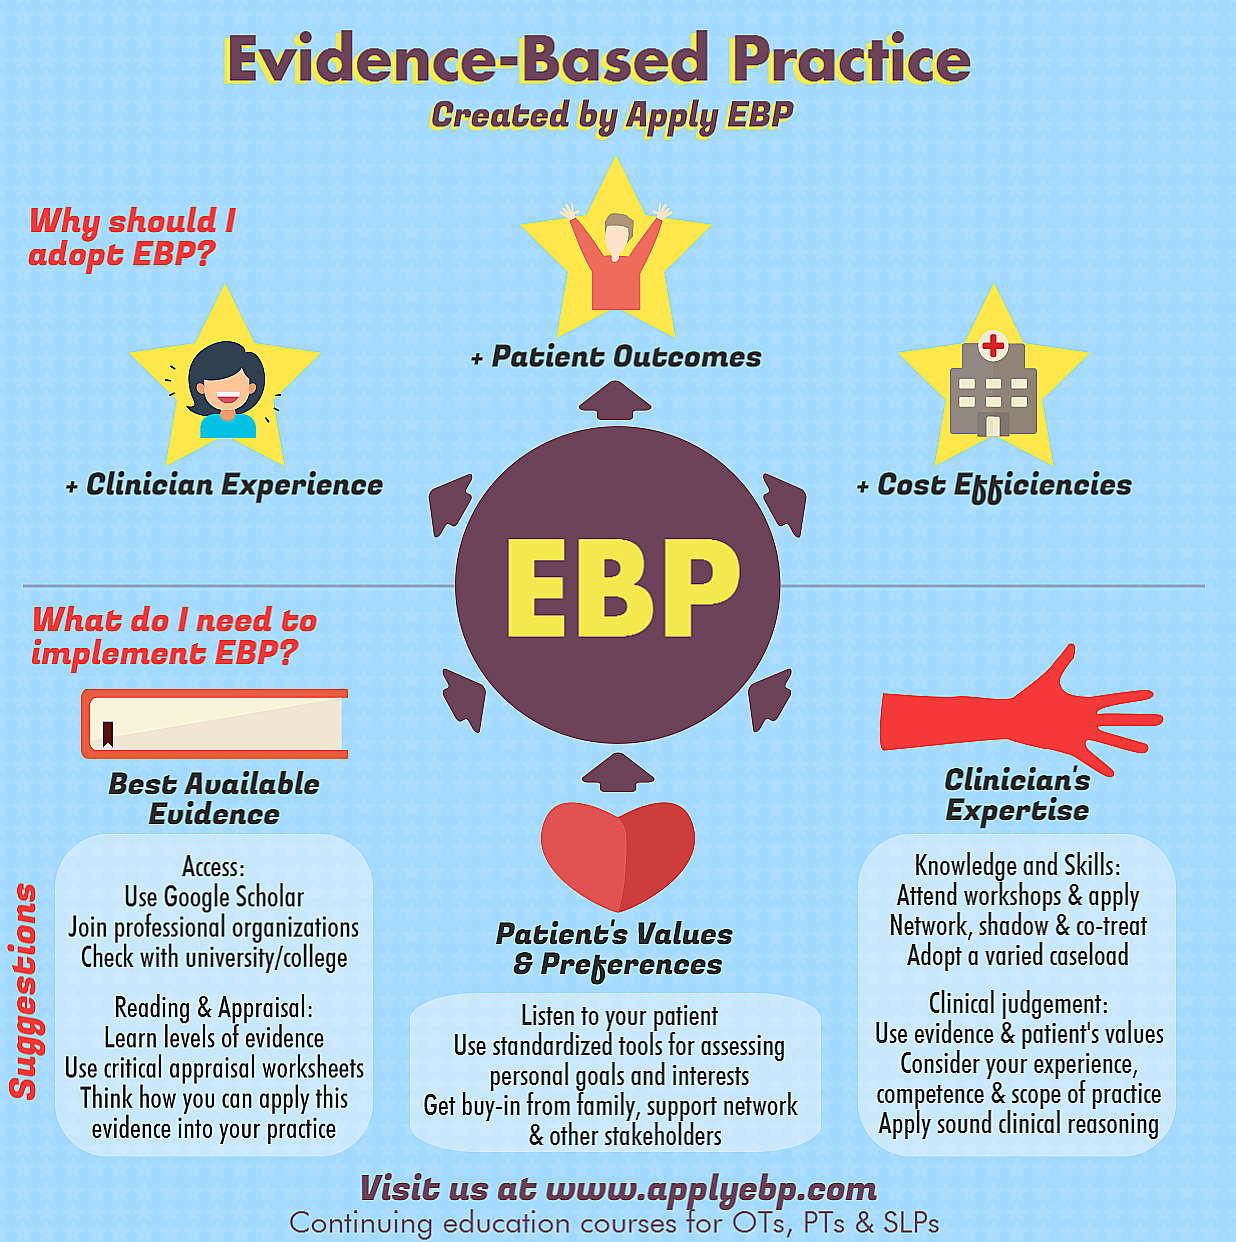 EvidenceBased Practice and Continuing Education Courses Apply EBP